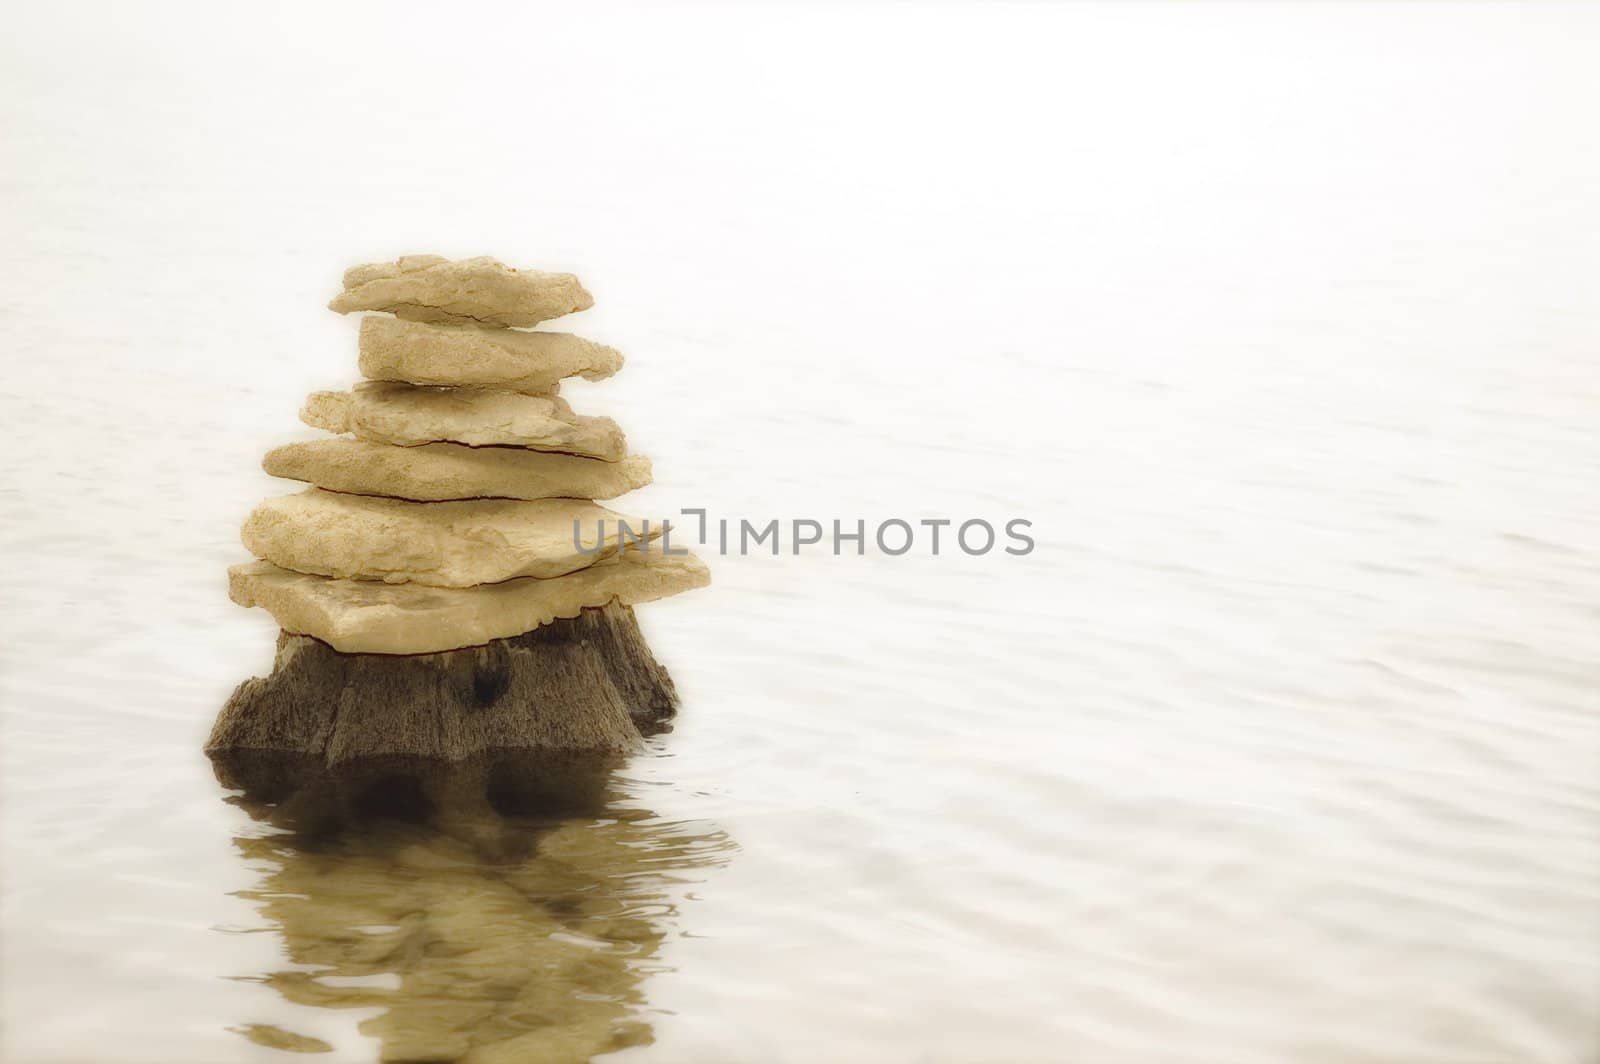 Rocks balancing on top of each other, picture fading to a white background